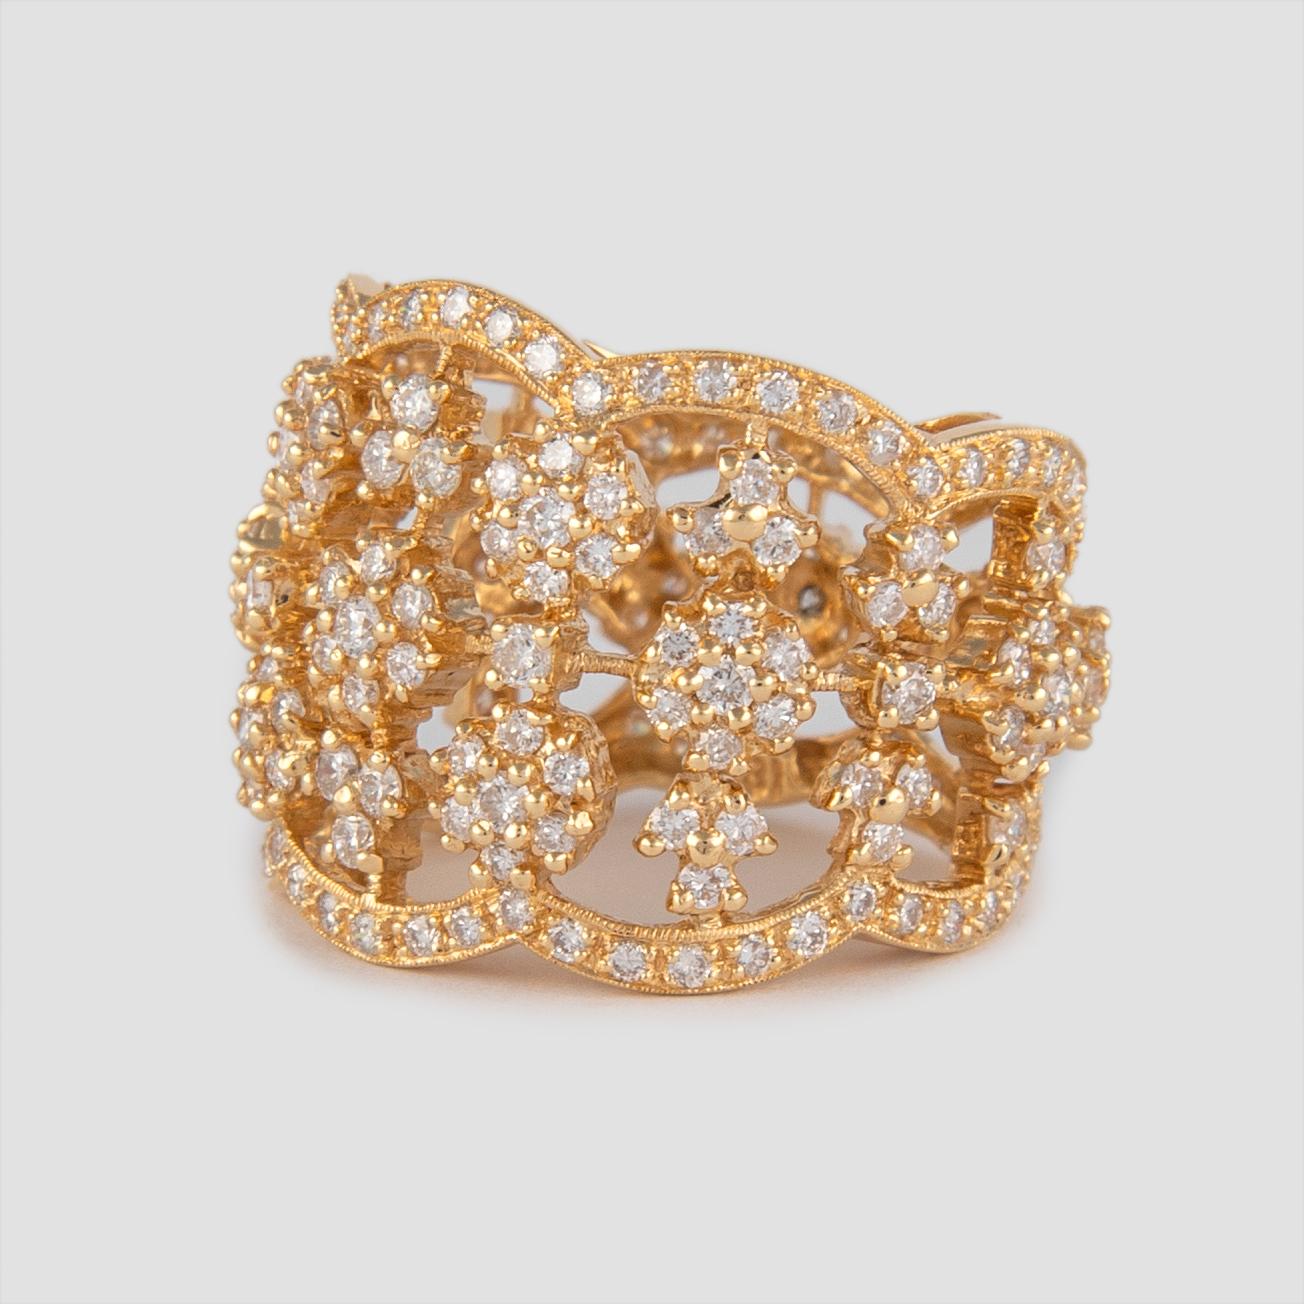 Contemporary 2.35 Carat Diamond and 18 Karat Yellow Gold Cocktail Ring For Sale